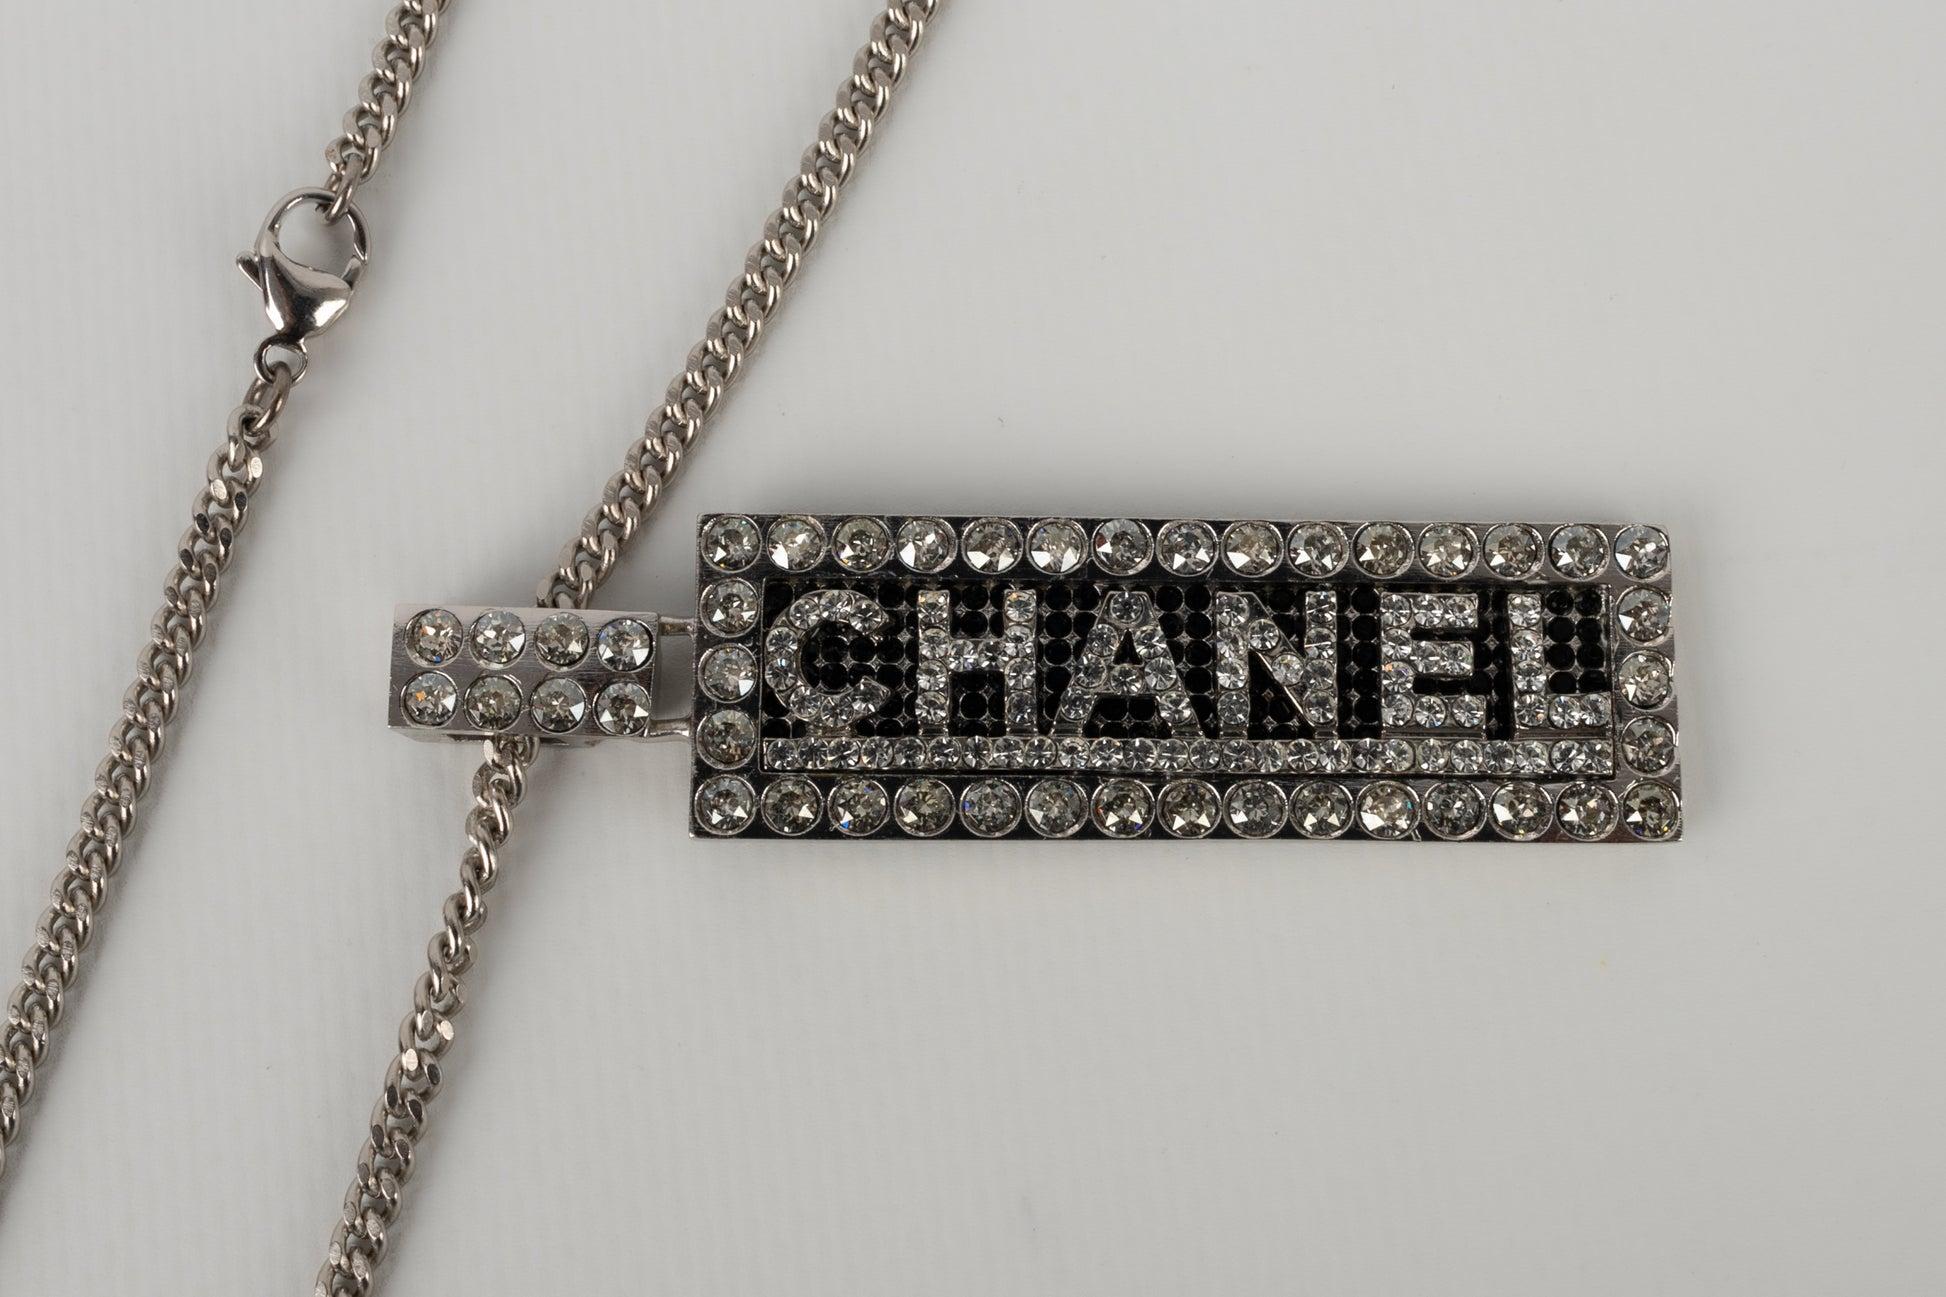 Chanel Silvery Metal Necklace with a Swarovski Rhinestone Pendant, Fall 2003 For Sale 1